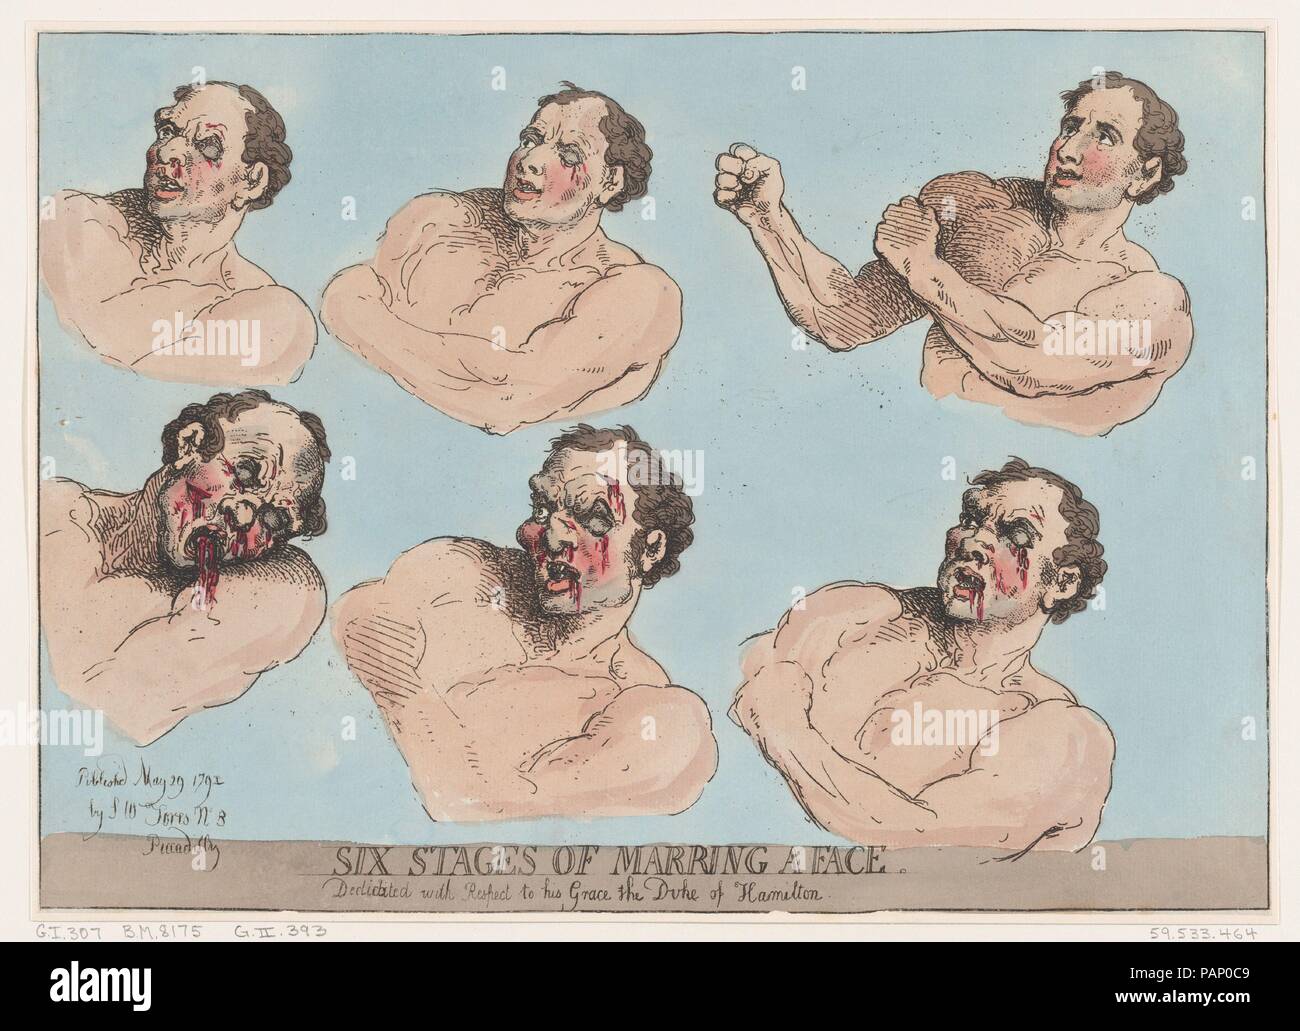 Six Stages of Marring a Face. Artist and publisher: Thomas Rowlandson (British, London 1757-1827 London). Dimensions: Sheet: 10 3/16 × 14 3/16 in. (25.8 × 36.1 cm). Date: May 29, 1792. Museum: Metropolitan Museum of Art, New York, USA. Stock Photo